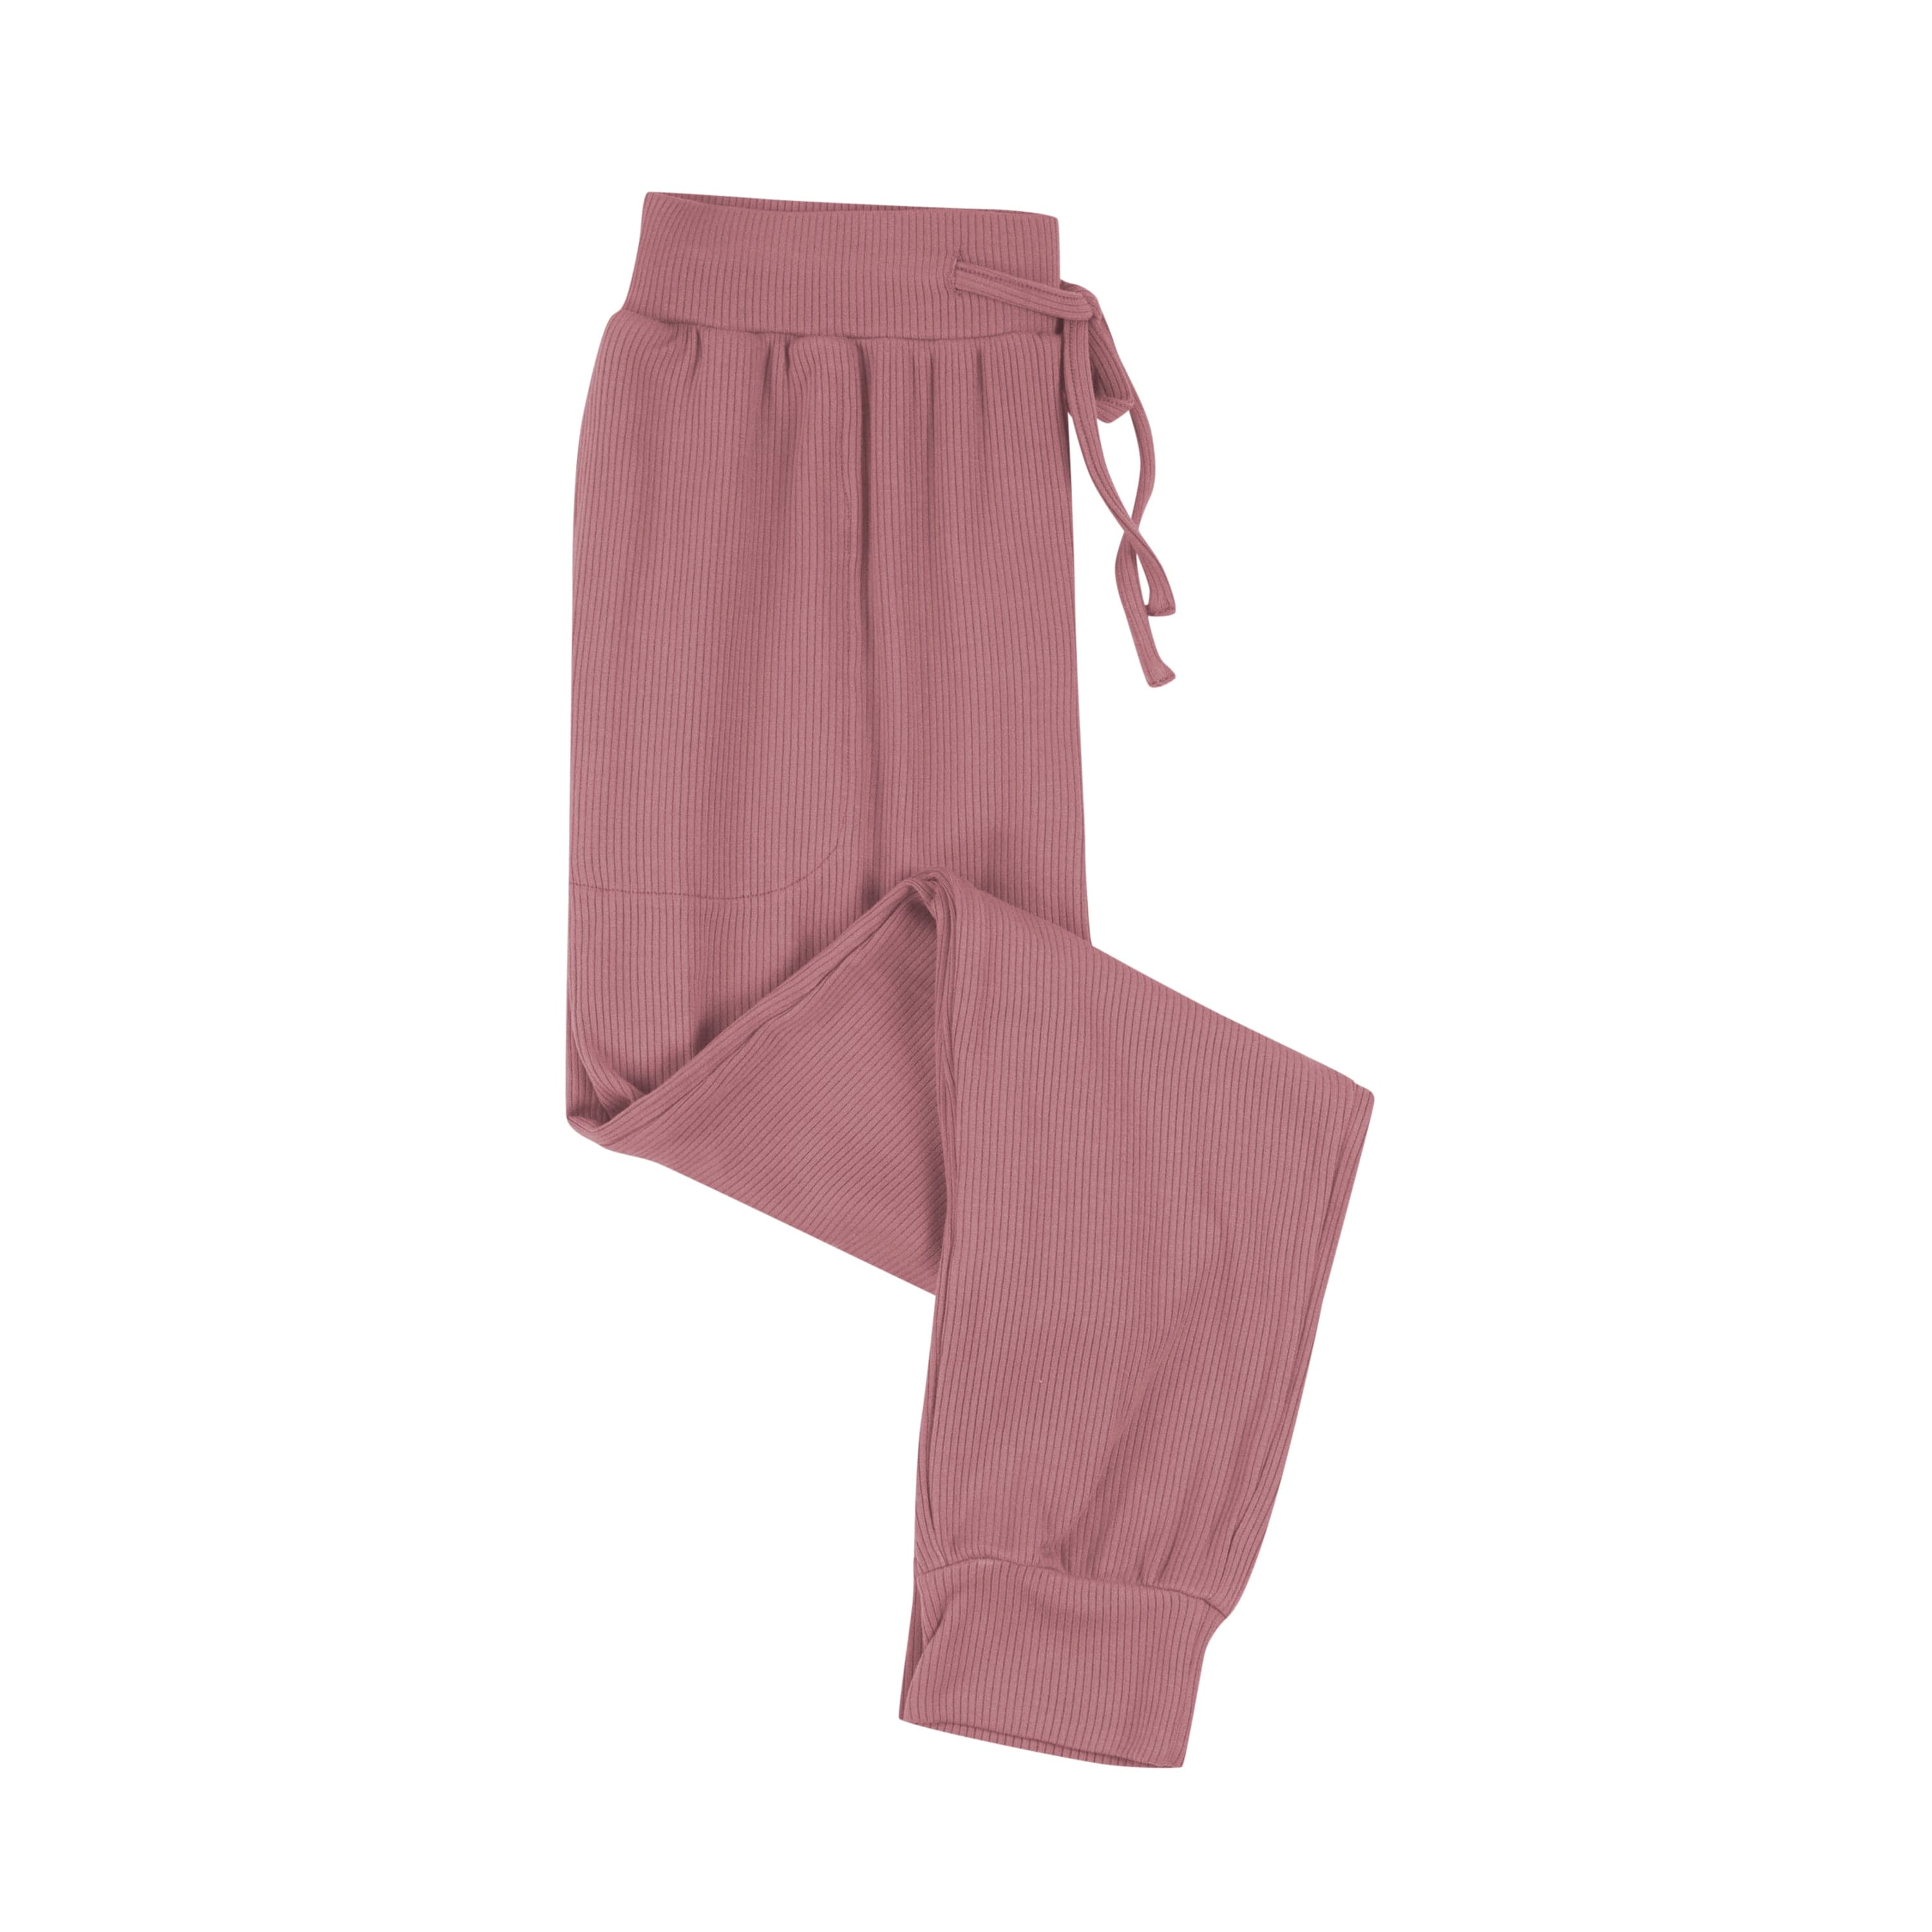 Xersion women's Jogger sweatpants Size XL - $19 - From Blooming